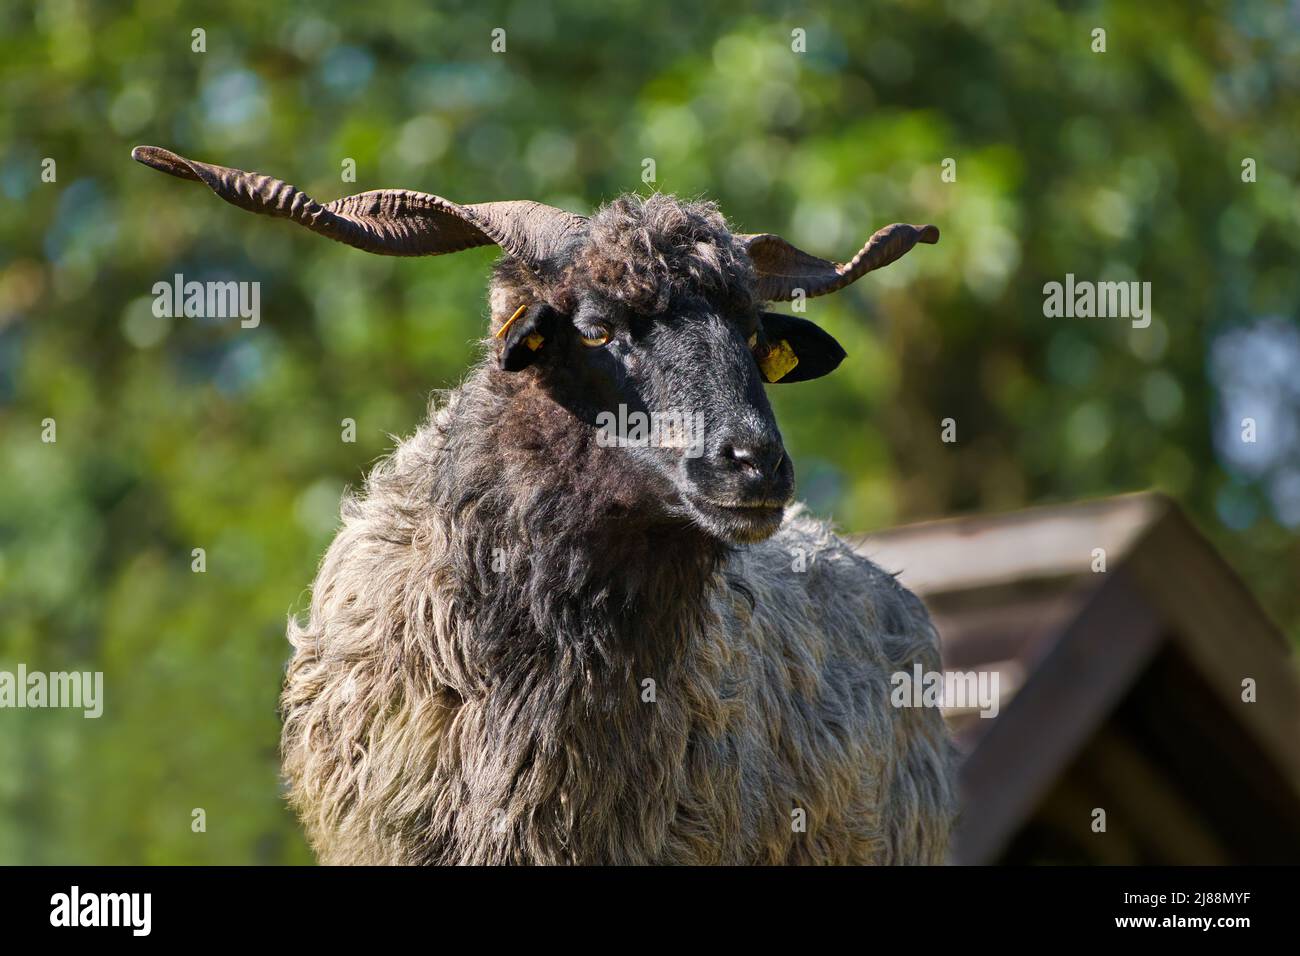 Portrait of a male black Hortobagy Racka sheep (Ovis aries strepsiceros Hungaricus) with long spiral shaped horns. Stock Photo